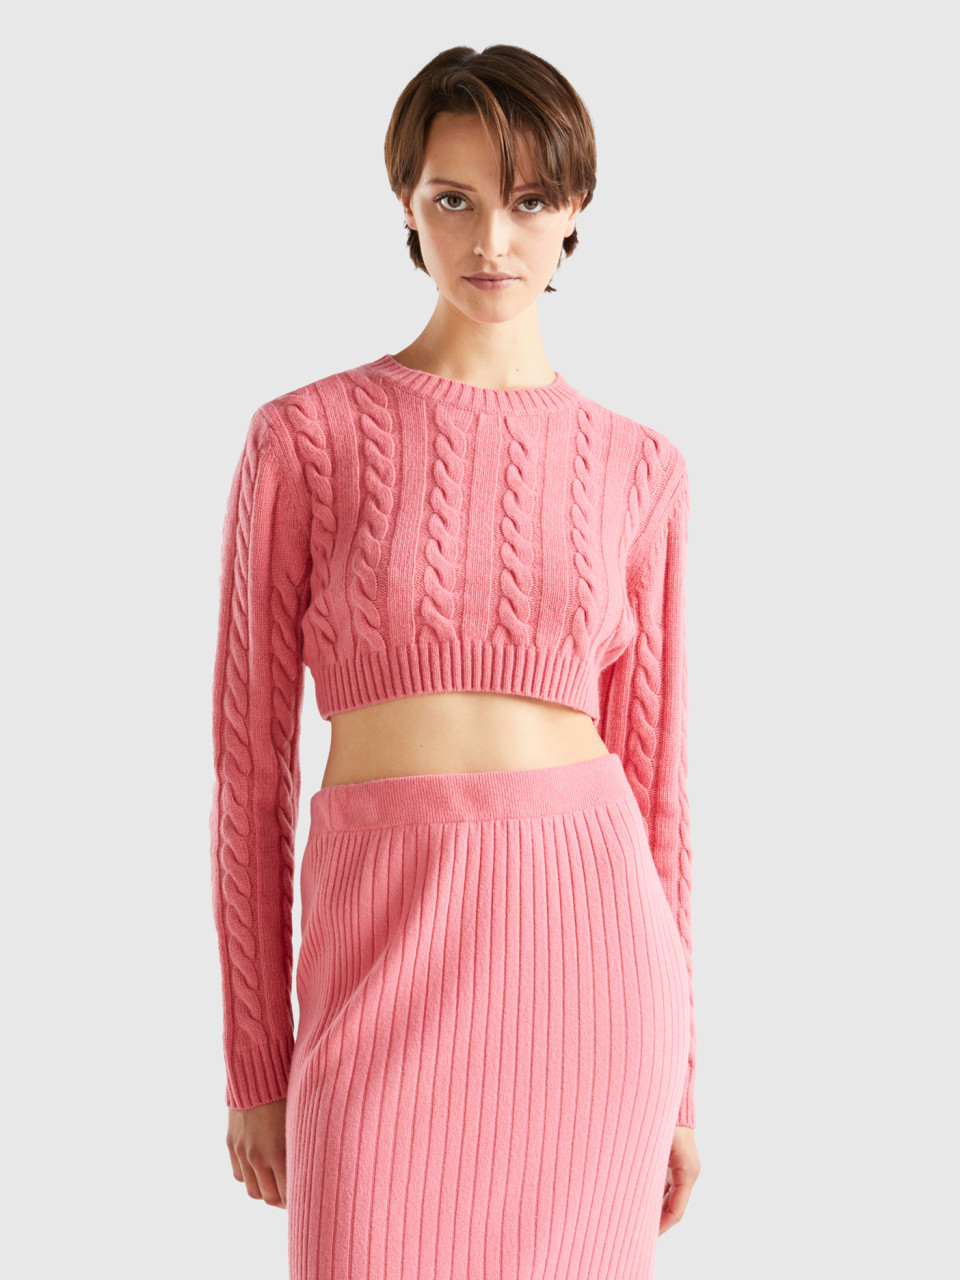 Benetton, Cropped Pullover Mit Zopfmustern, Pink, female